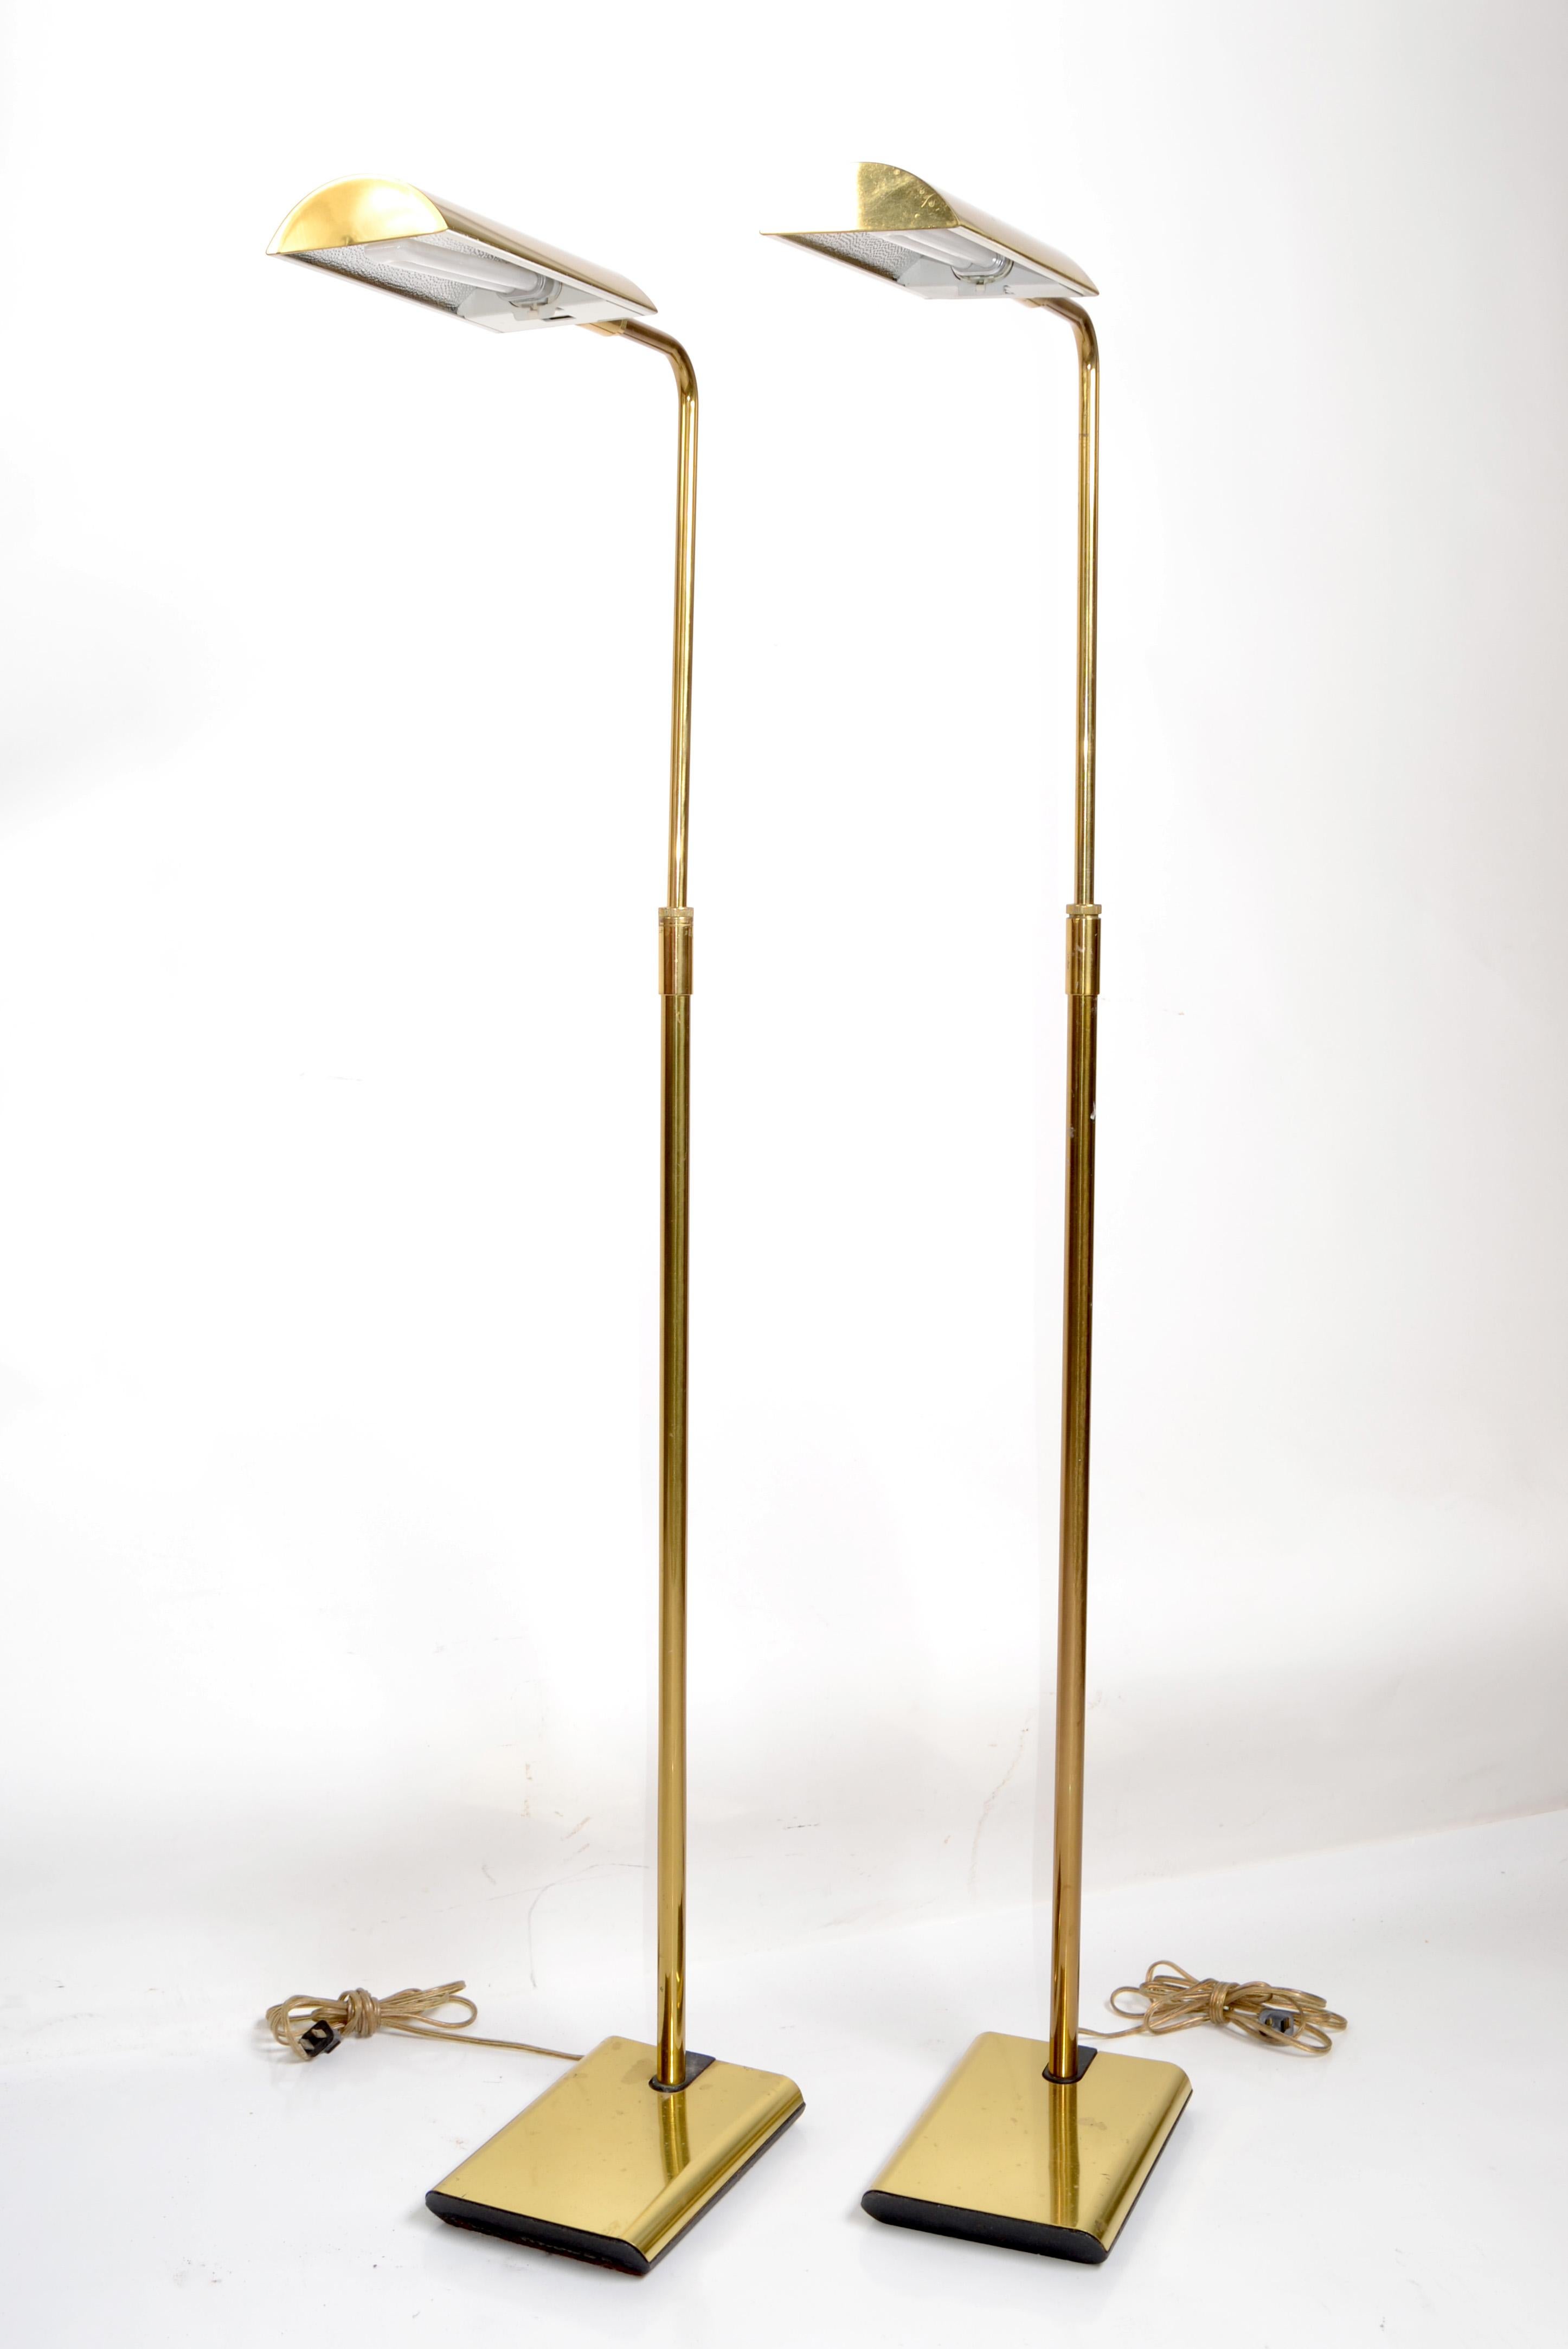 Pair Koch & Lowy Articulated Polished Brass Floor Lamps Mid-Century Modern 1965 In Good Condition For Sale In Miami, FL